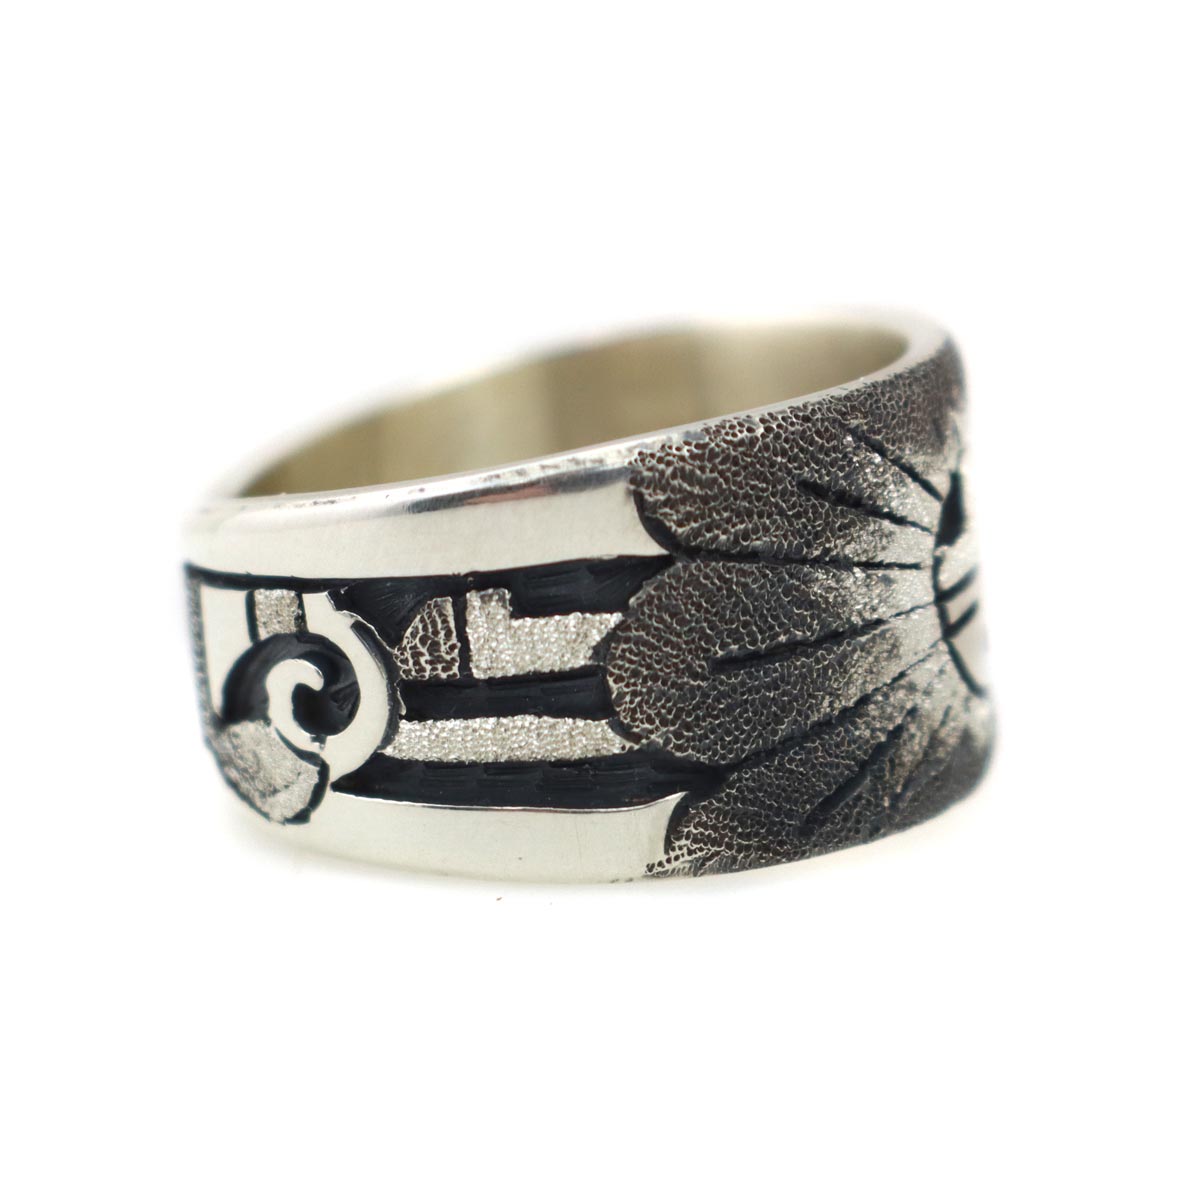 Ronald Wadsworth - Hopi Contemporary Sterling Silver Overlay Ring with Sunface Kachina Design, size 9 (J14773) 1